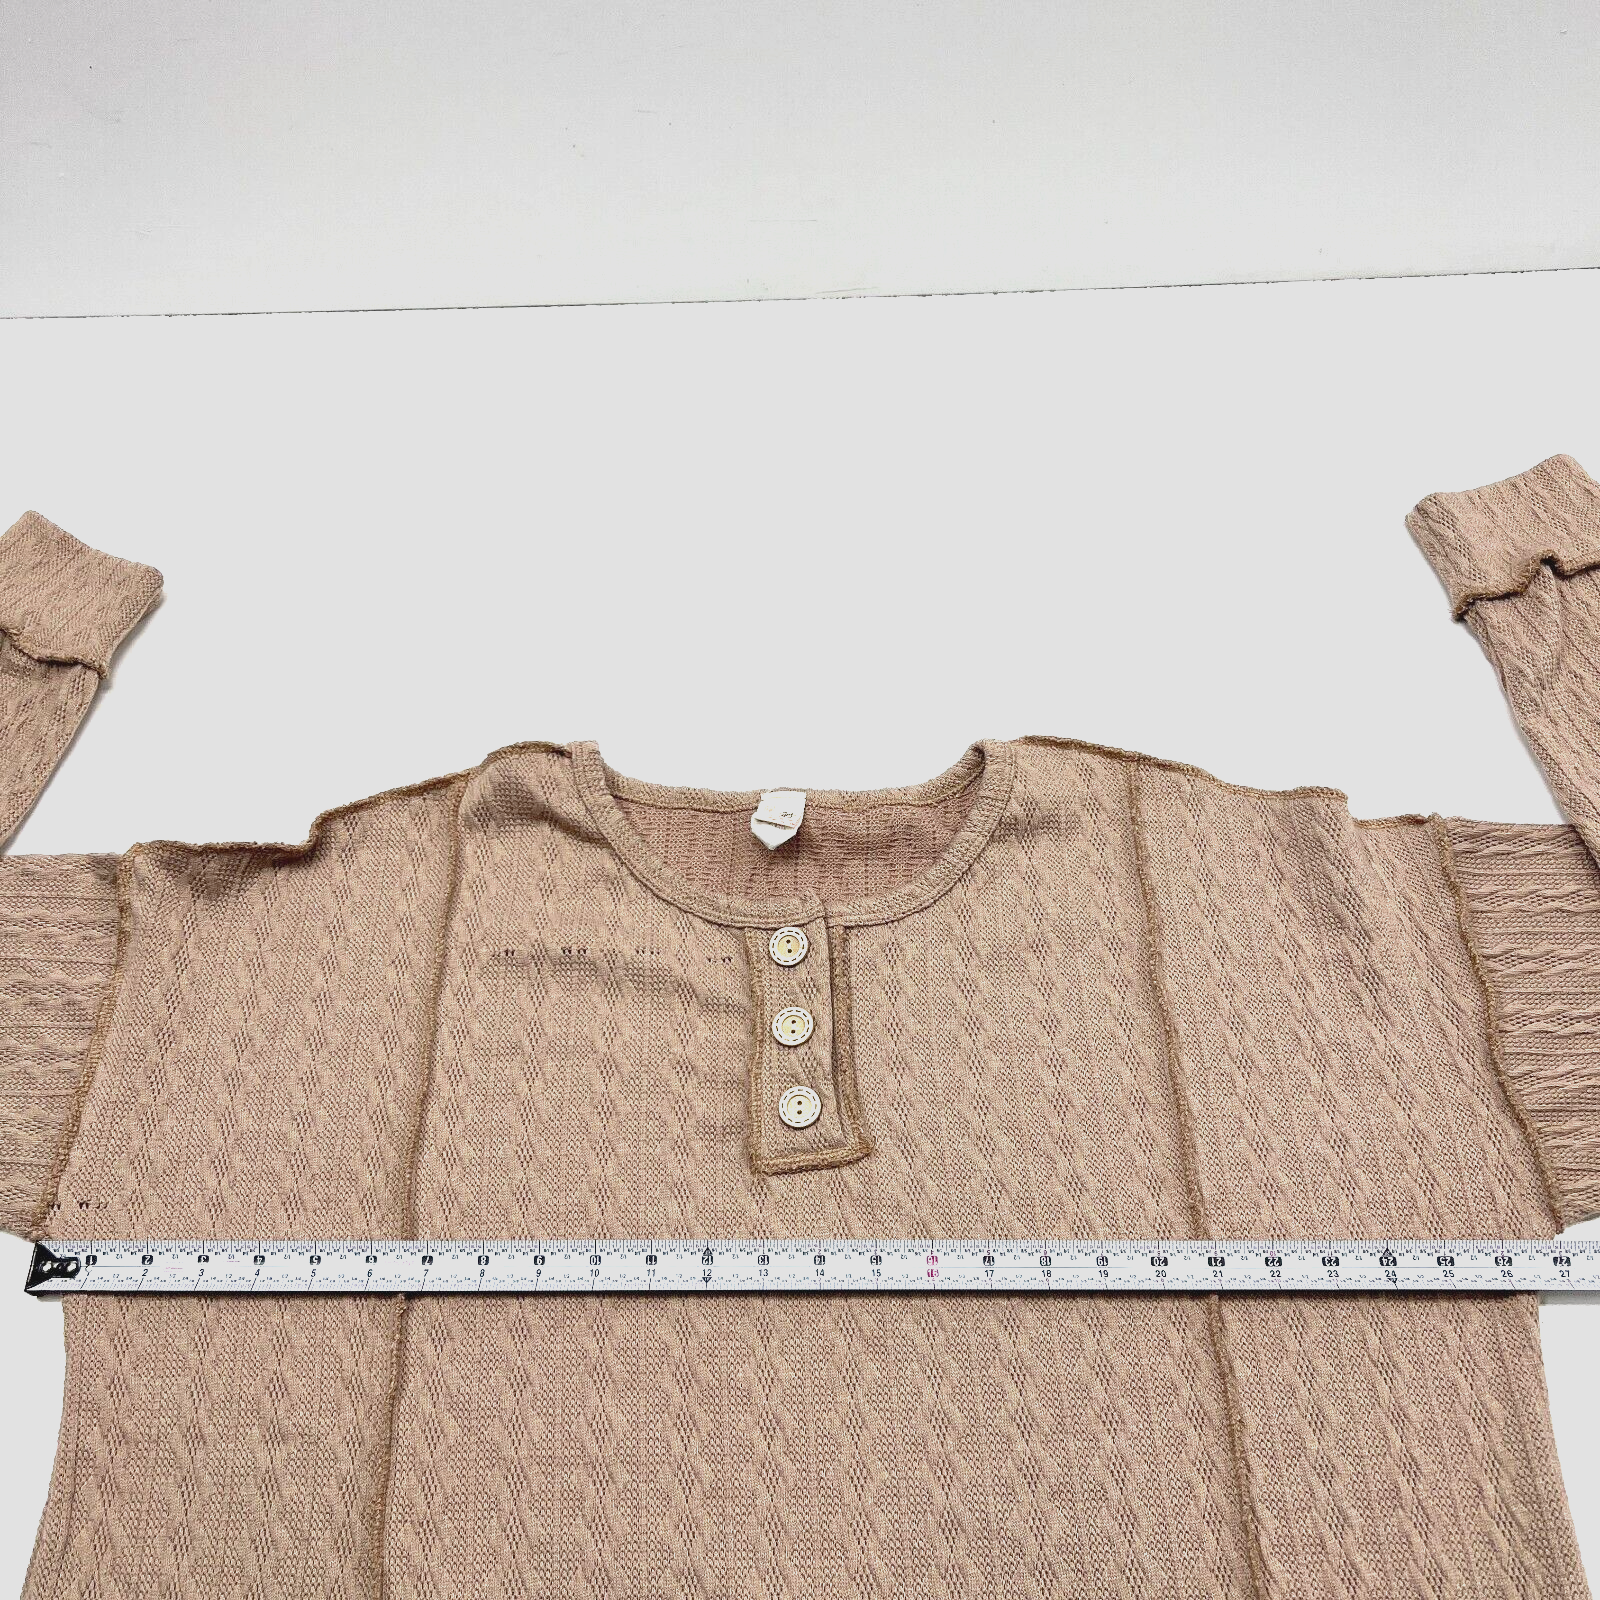 7th Ray Sweater Beige Tan Sandy Brown Buttons Unsized 54 in 3X See Measurements